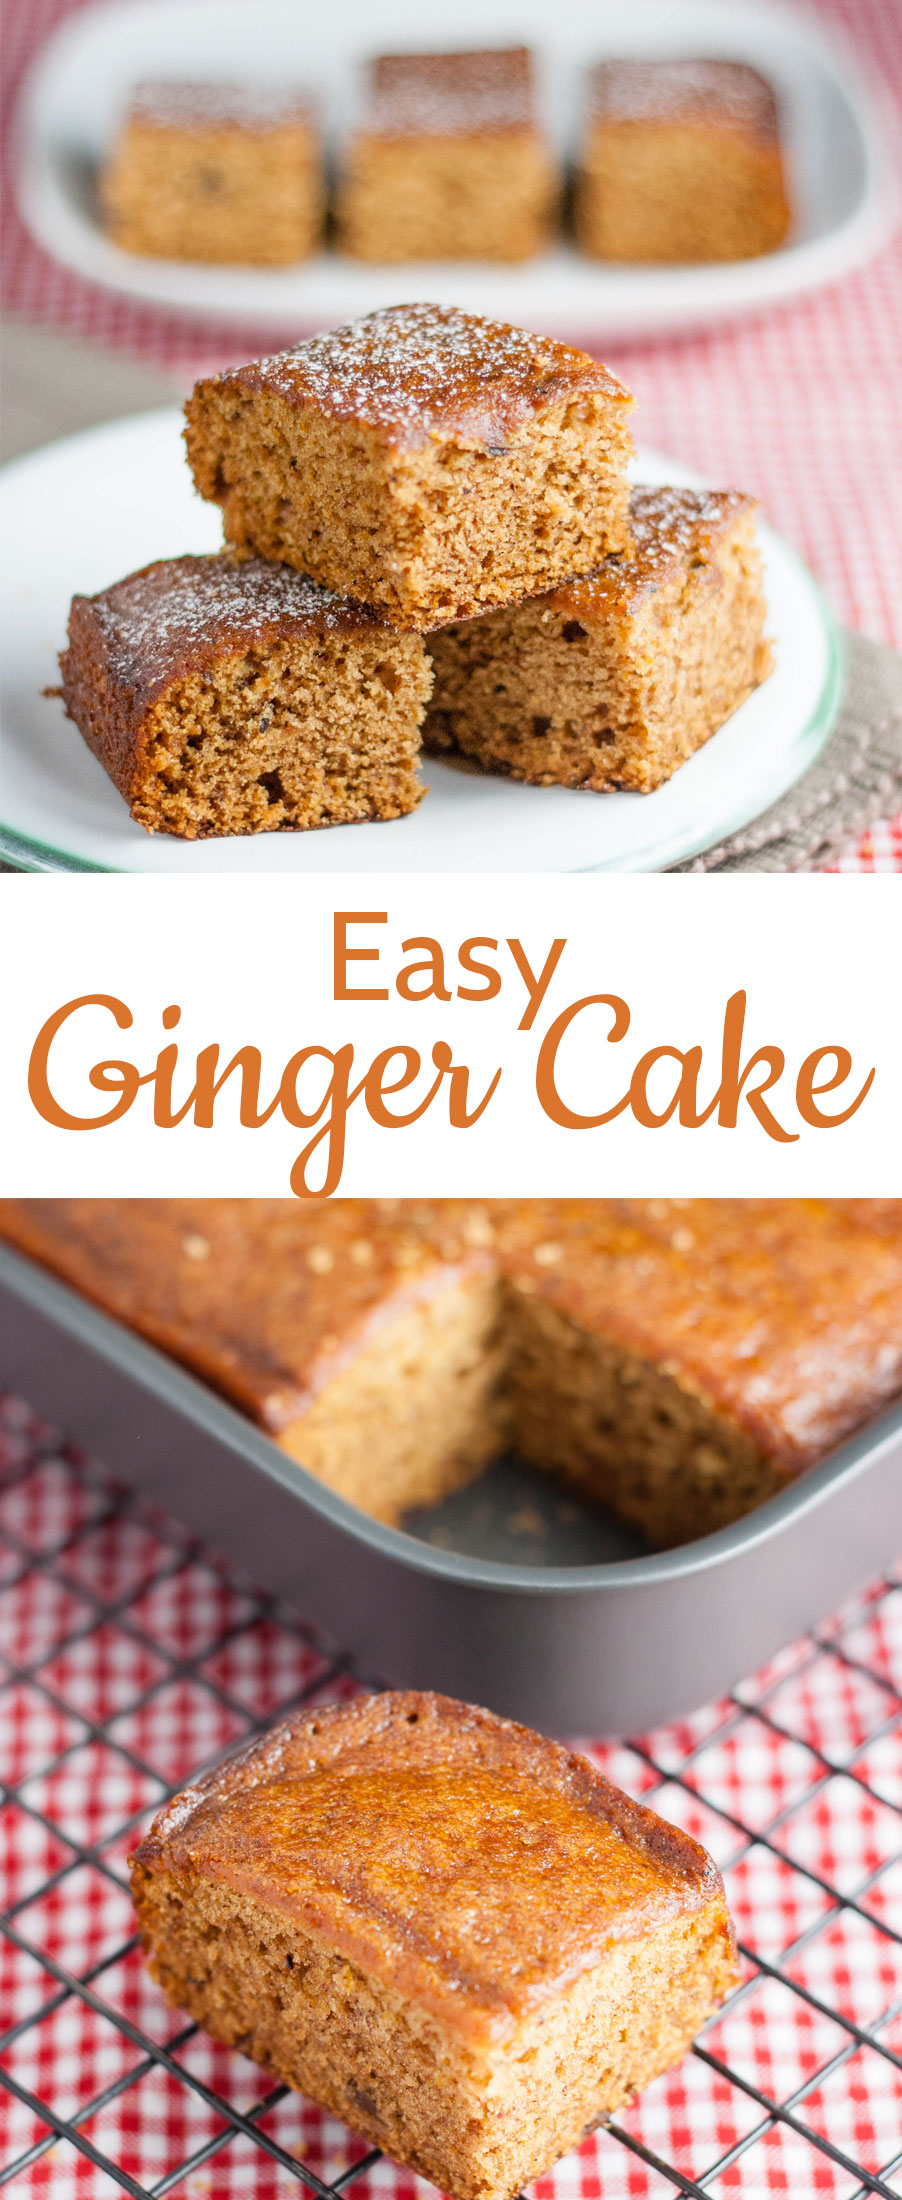 This easy ginger cake is delicious, and made entirely from store cupboard ingredients. Simple put all the ingredients into a mixer and whizz. Vegan too.